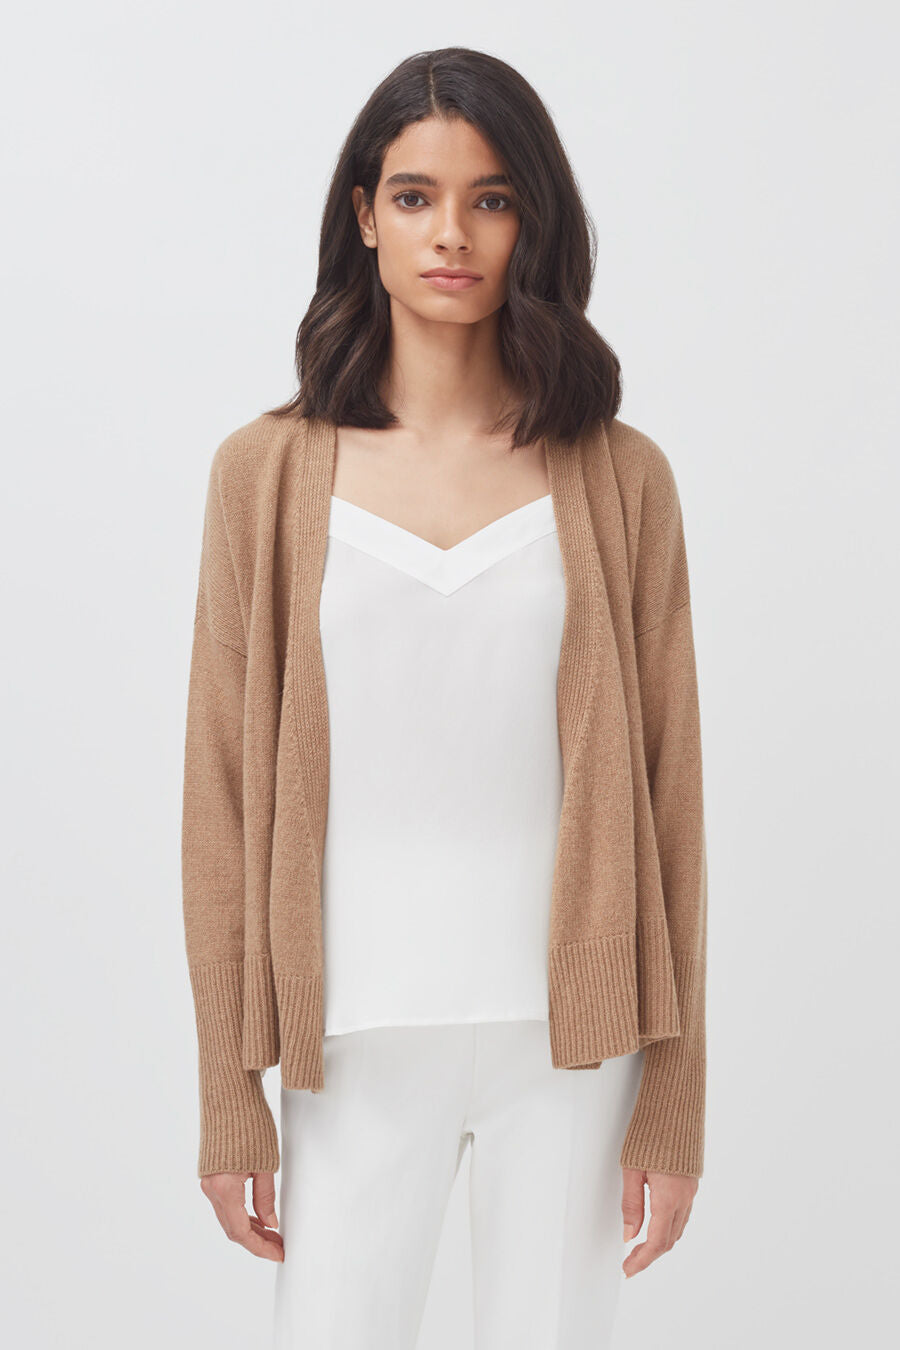 Woman standing in a cardigan over a top with plain background.